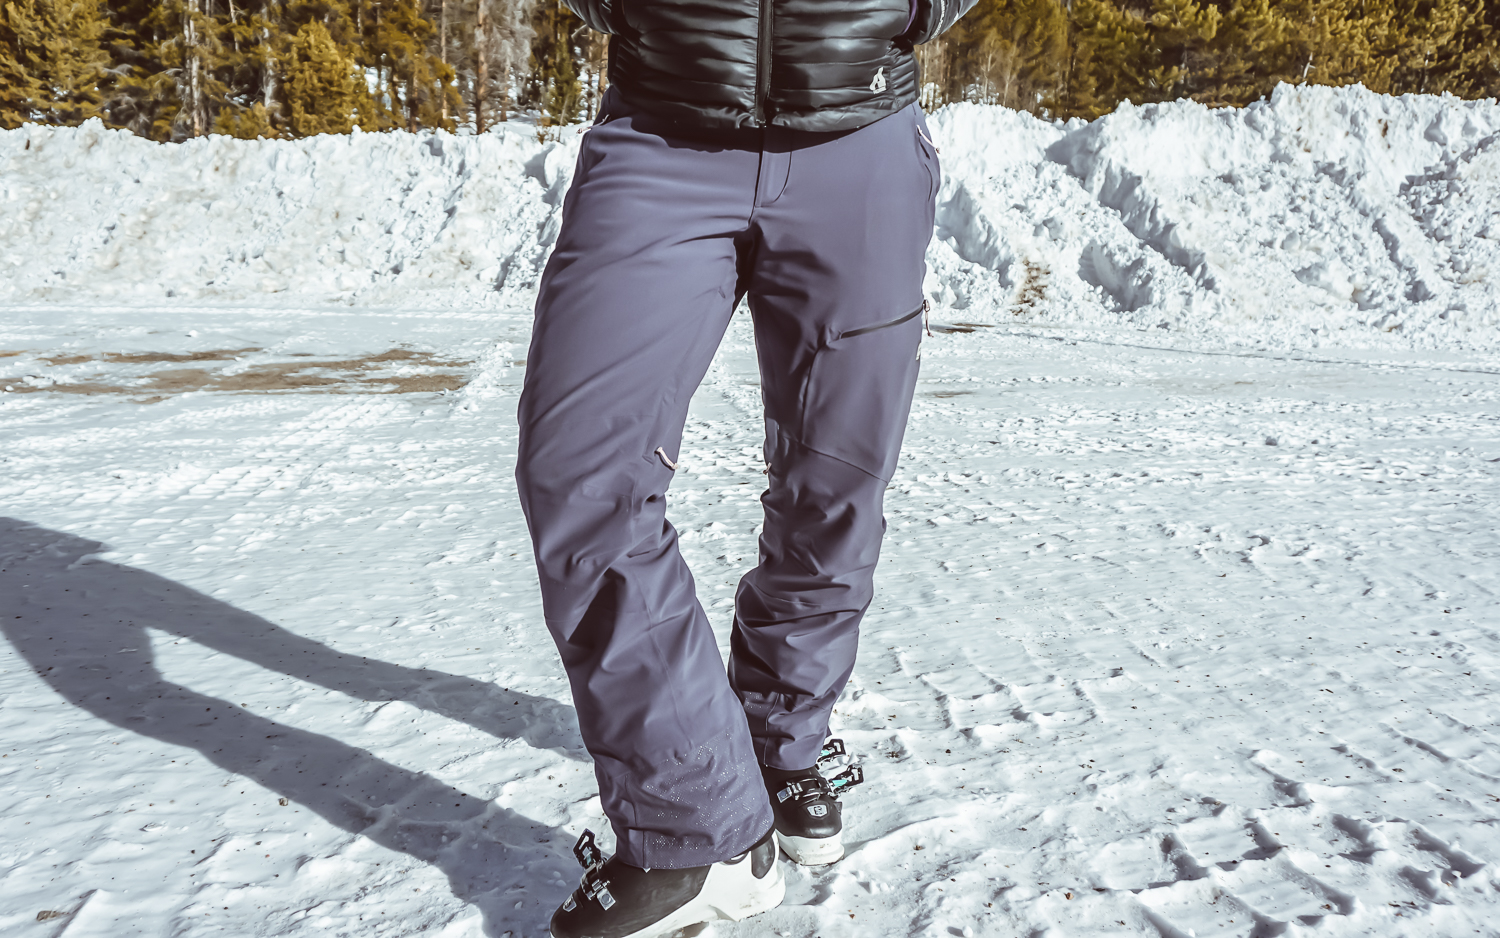 [Review] The Clara Pant by Orage – Adventure Rig